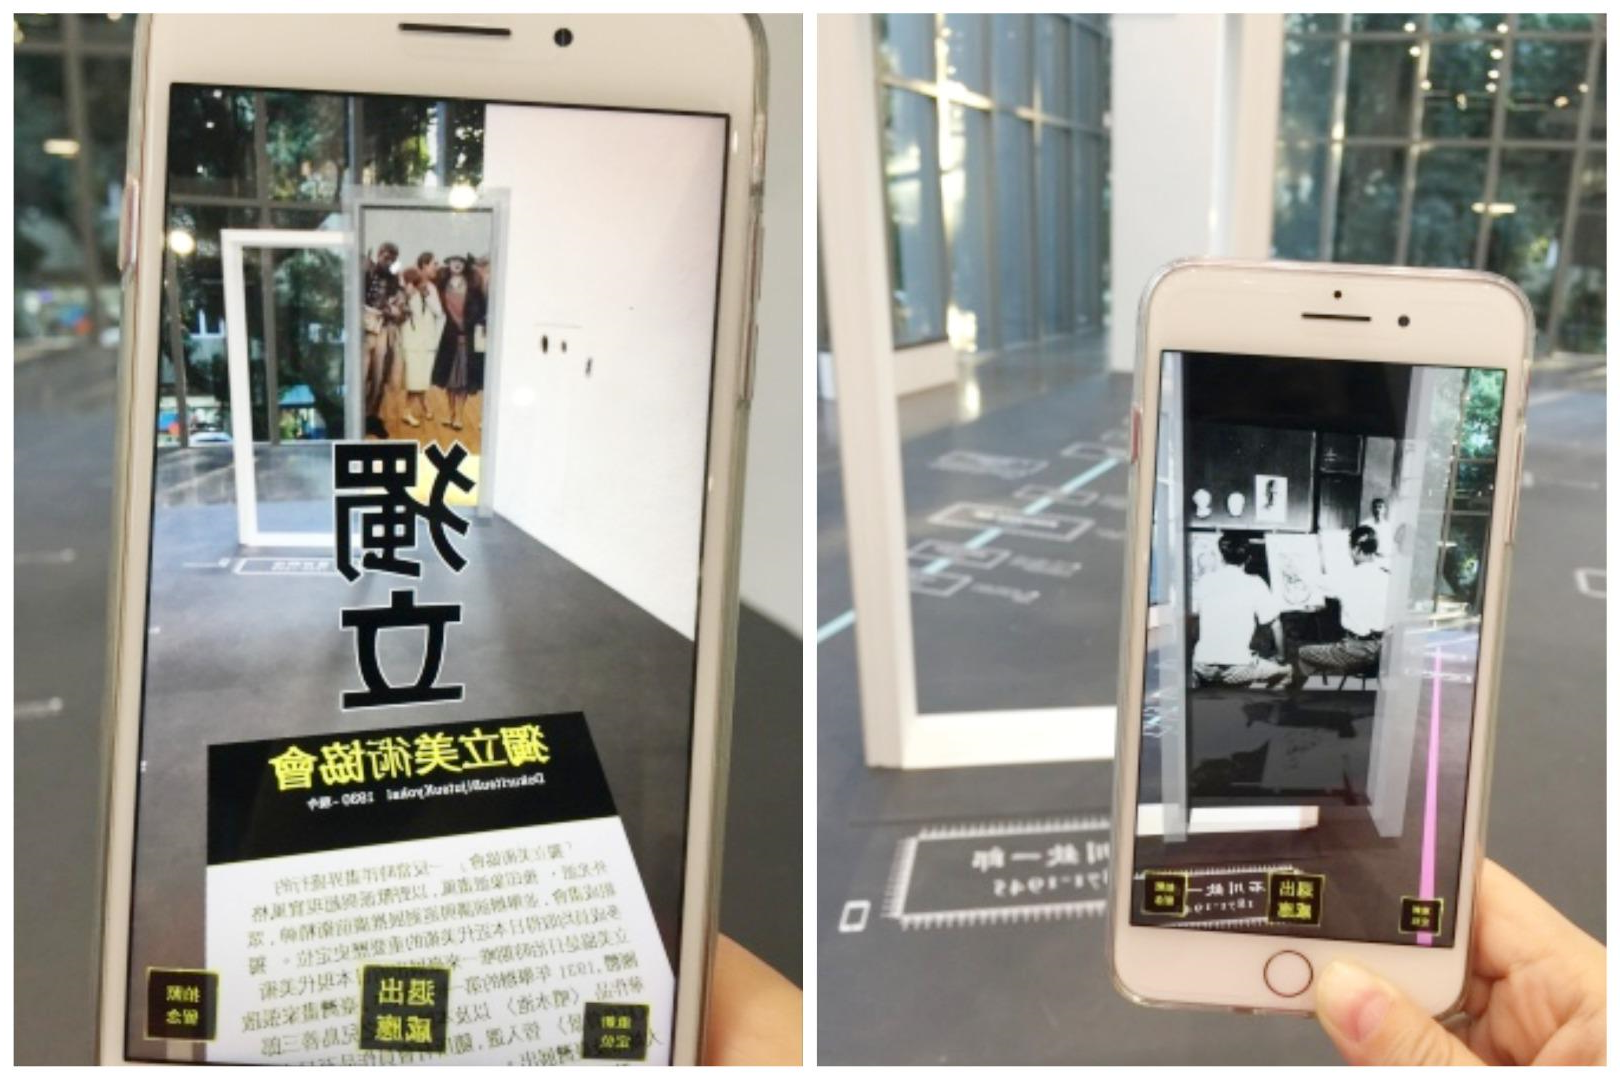 Designed by Wang Yi, king one, Modern Japanese Western Painting Exhibition, interactive art, digital interactive art, AR experience, interactive art